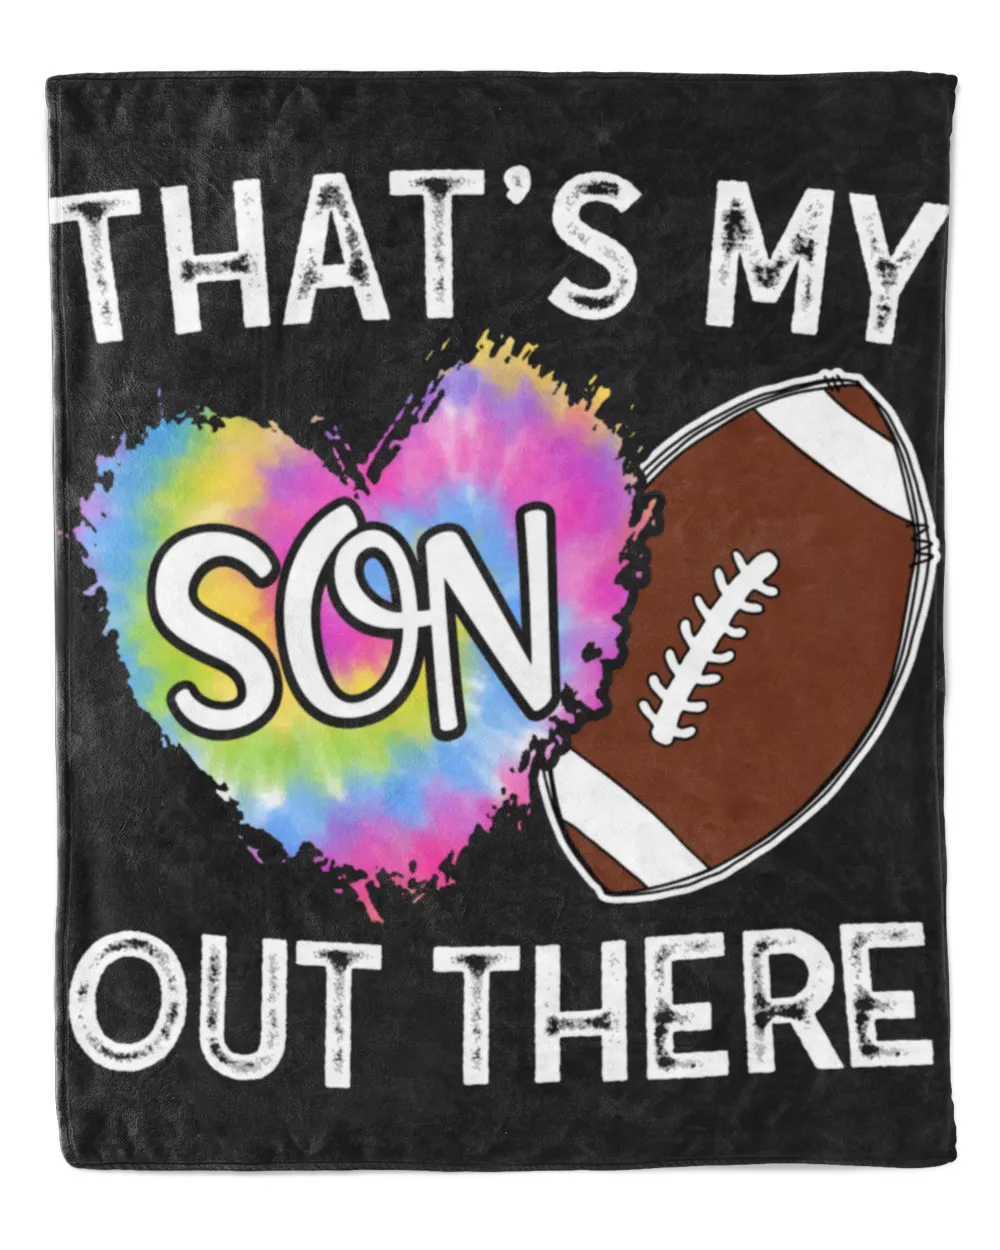 football-mom-that39s-my-son-out-there-footbal